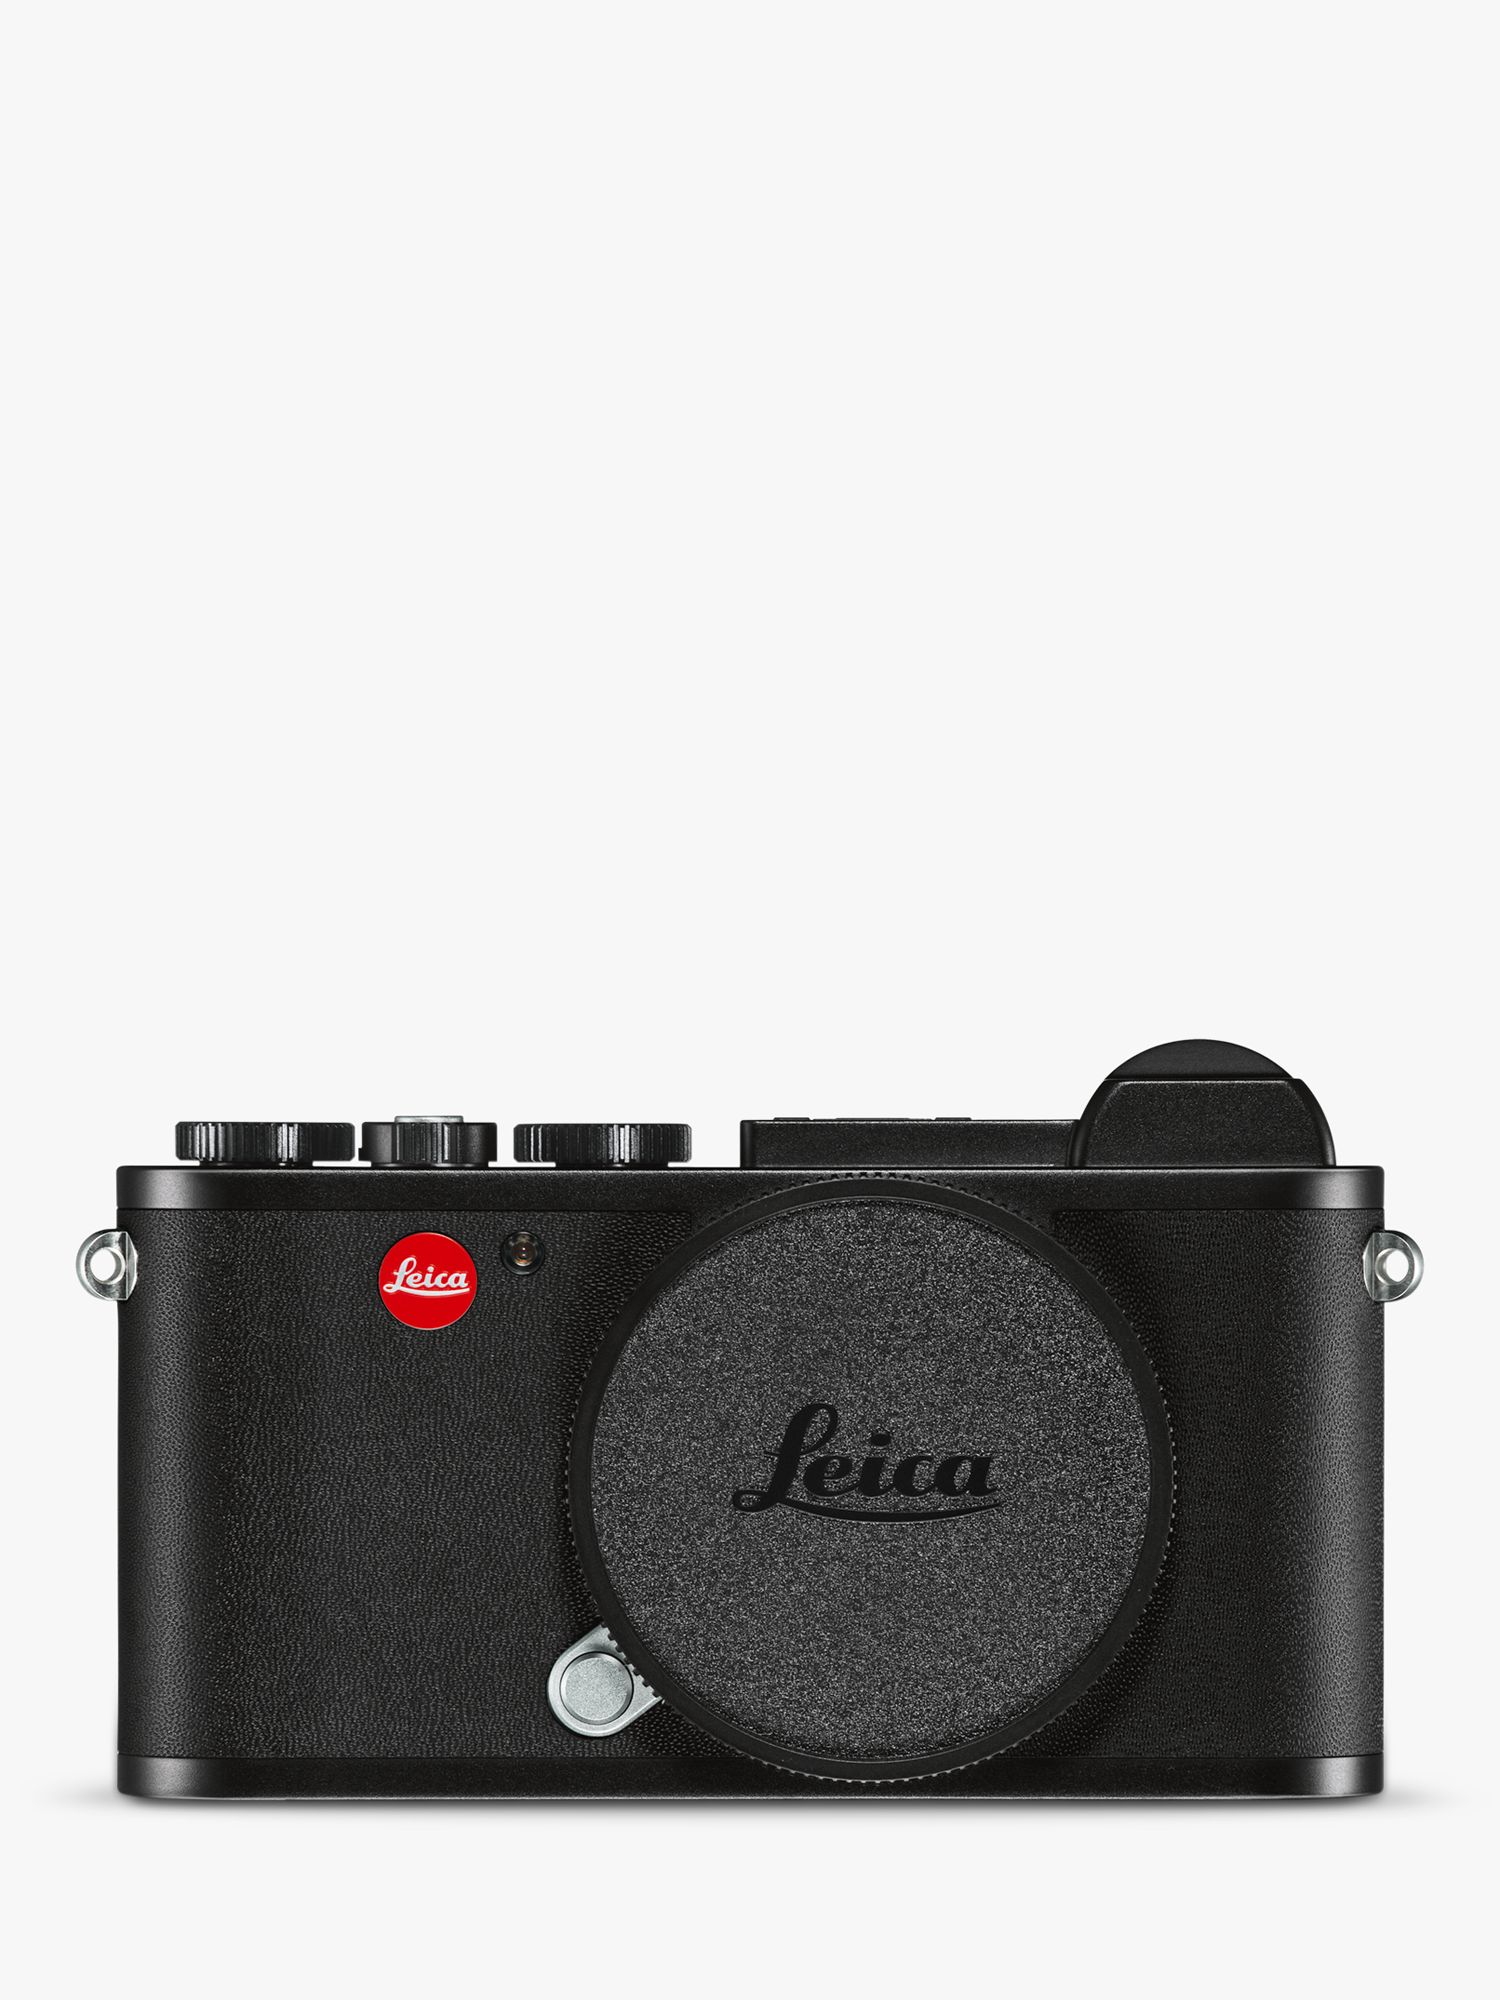 Image of Leica CL Compact System Camera 4K Ultra HD 24MP WiFi EVF 3 Touch Screen Body Only